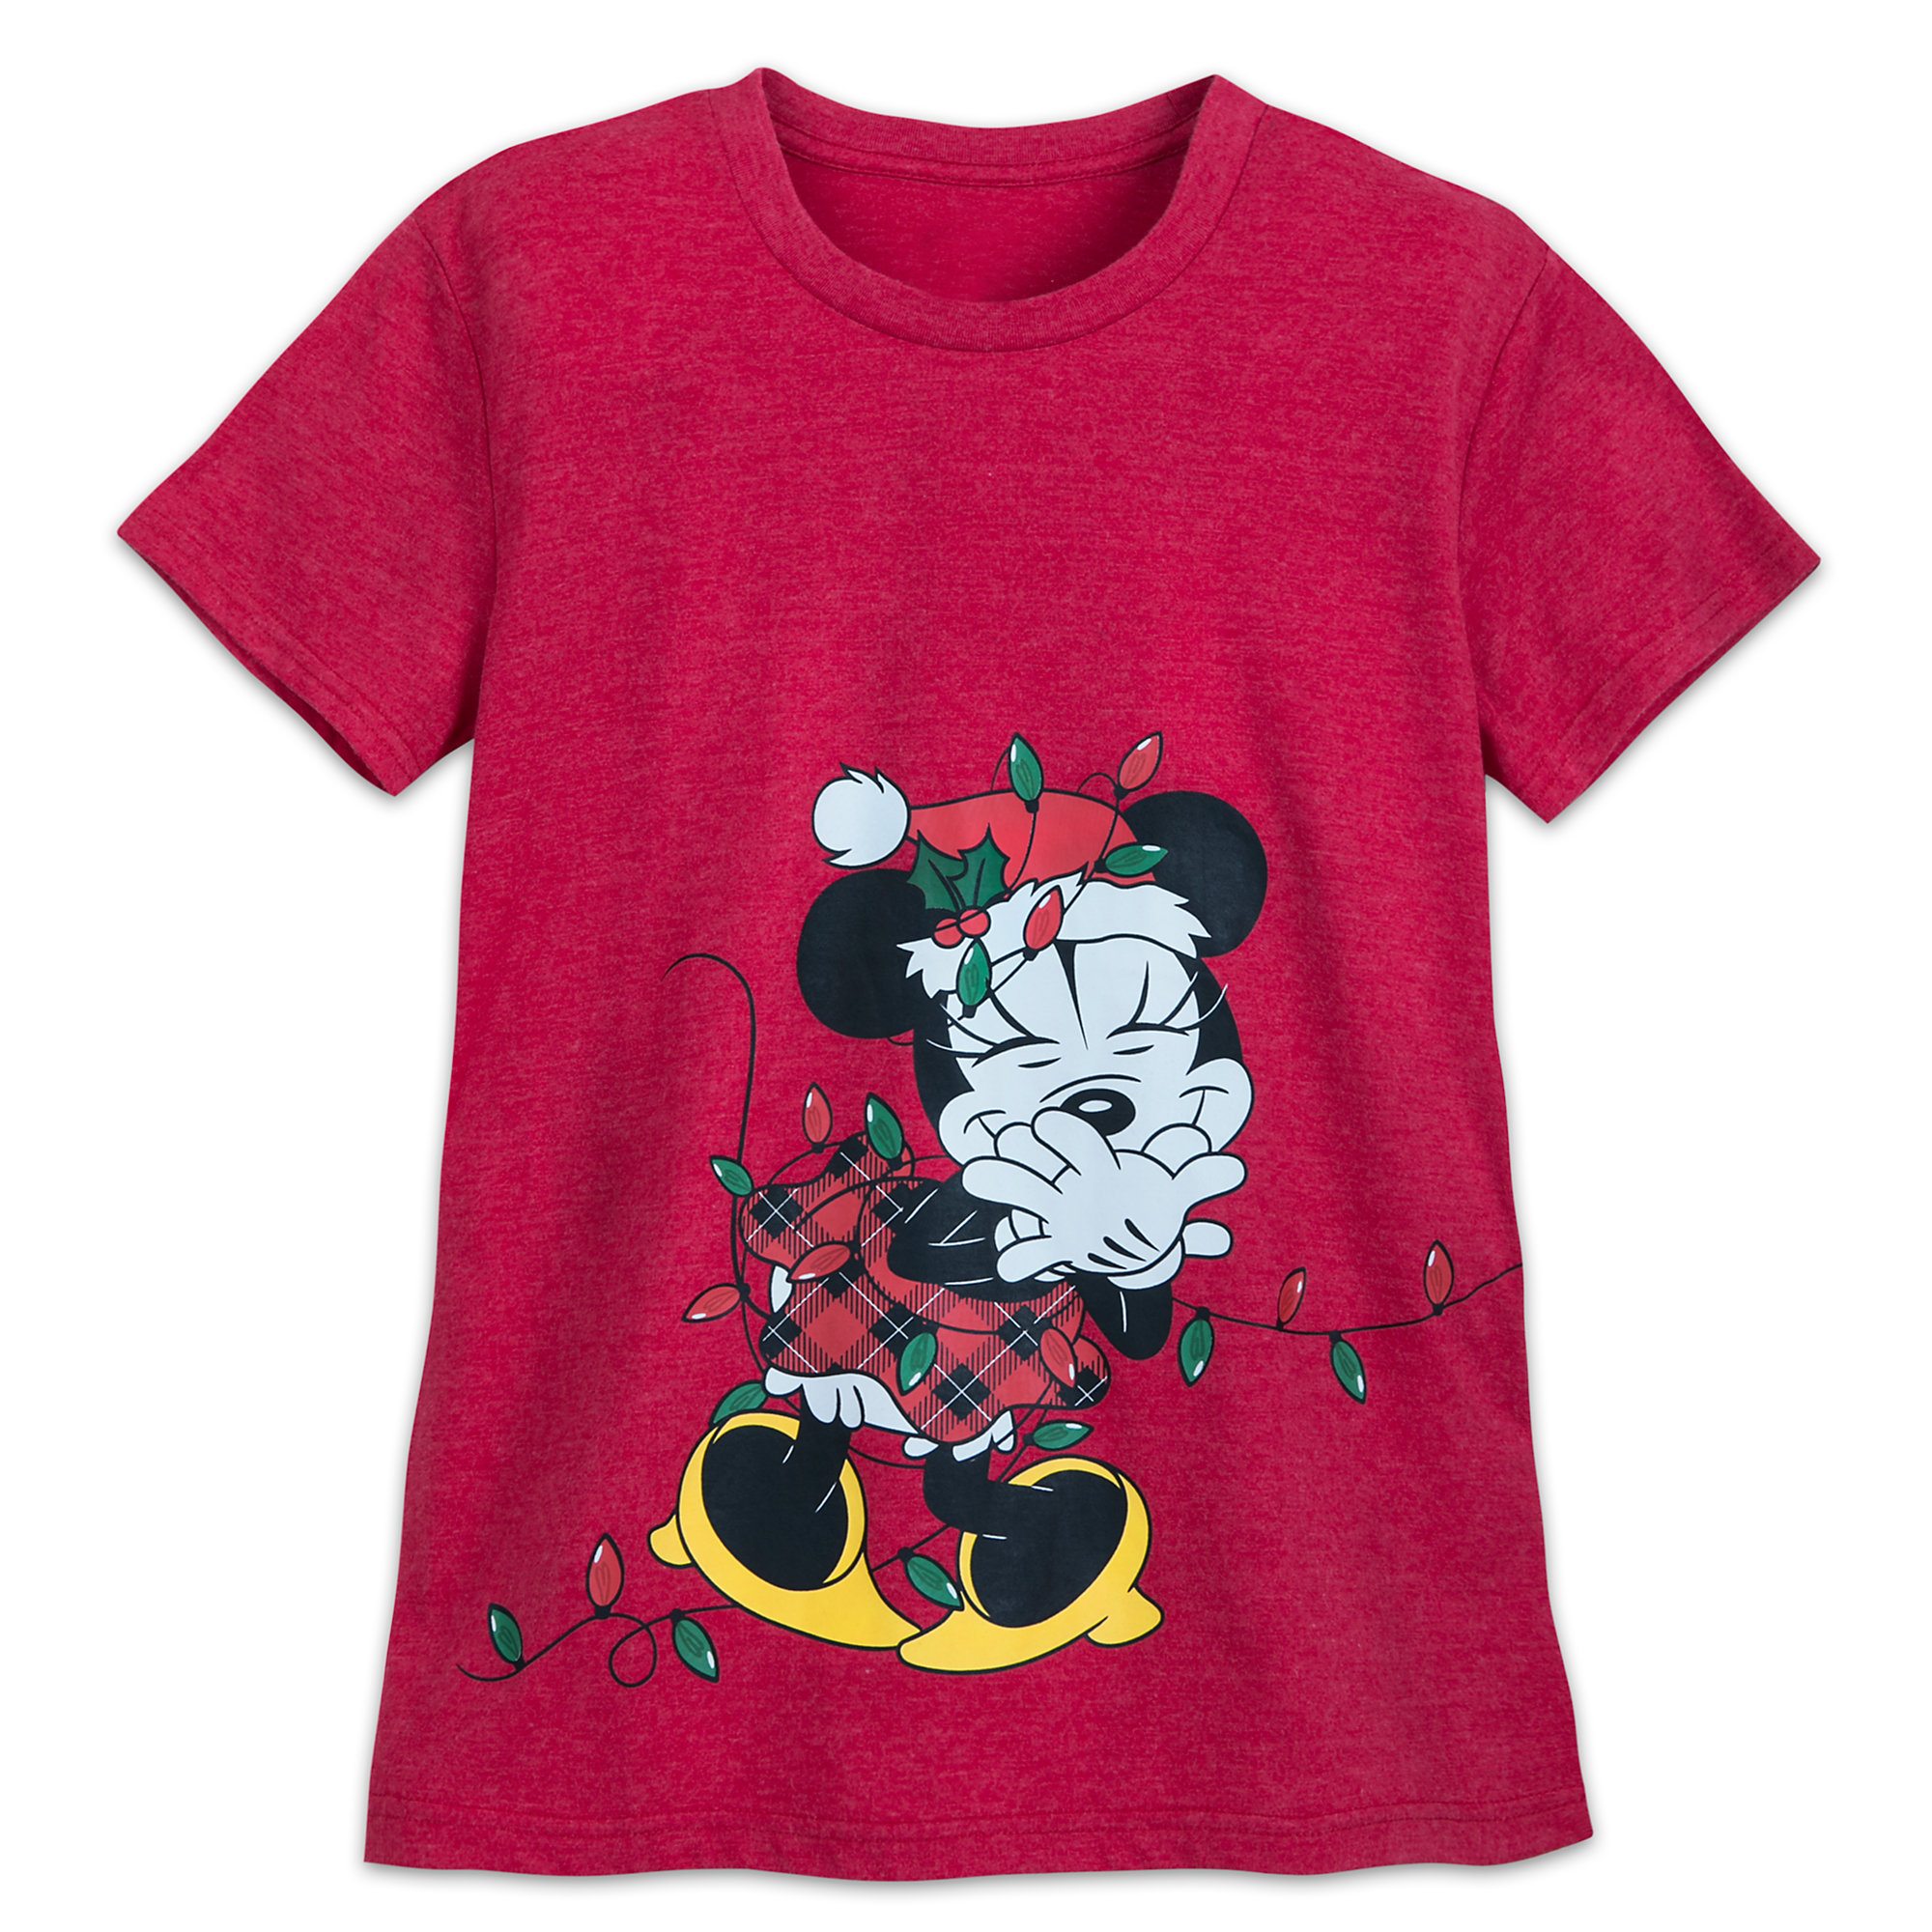 Santa Minnie Mouse Holiday Lights T-Shirt for Women